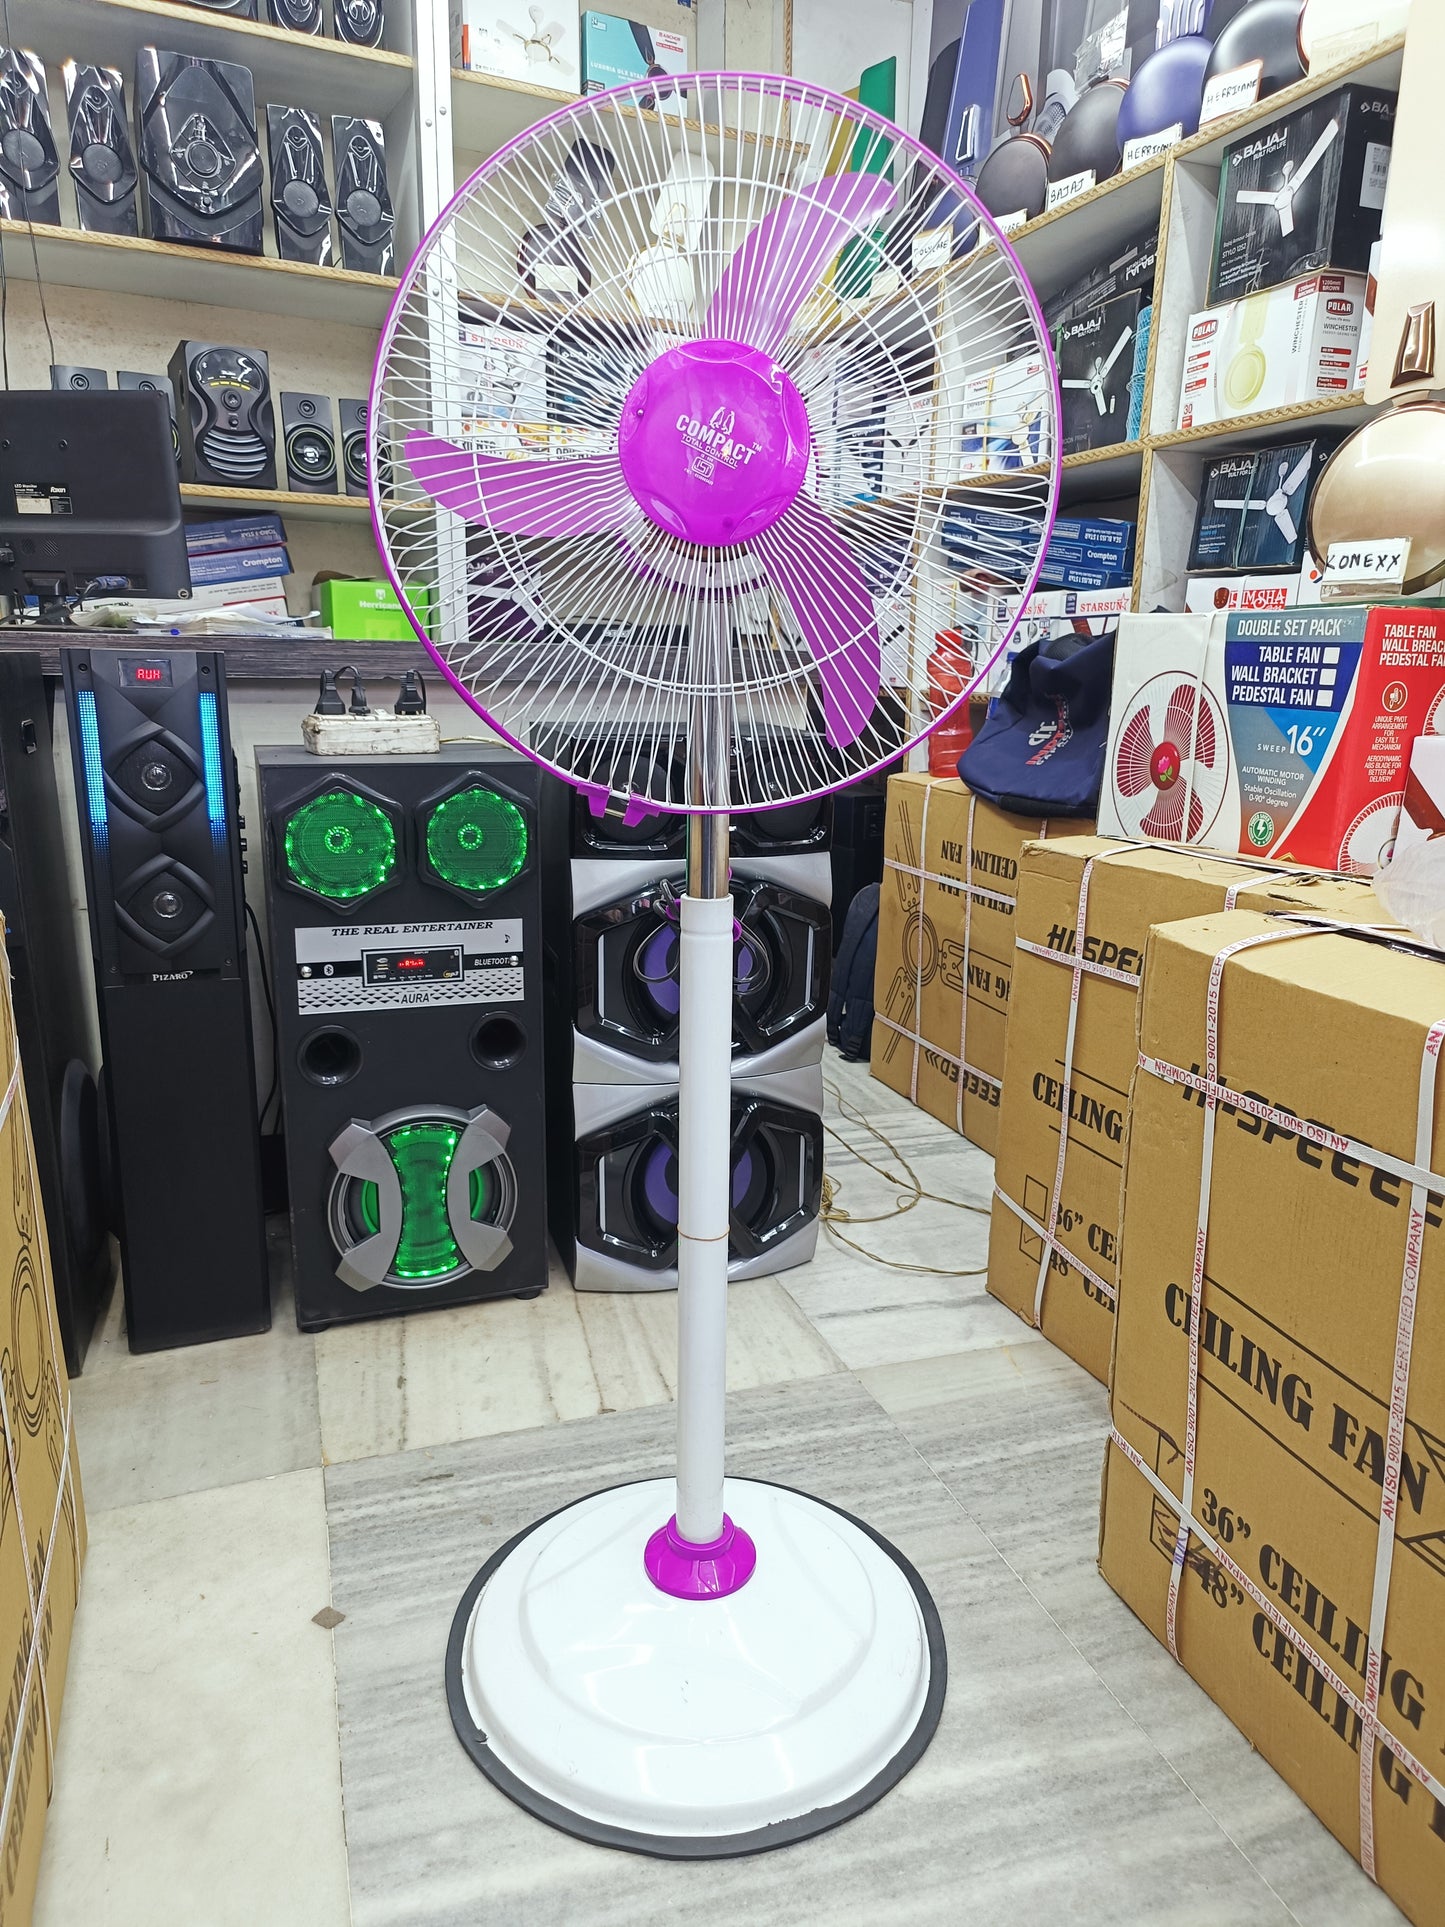 Compact High Speed Pedestal / Stand Fan (Speed Adjustable)